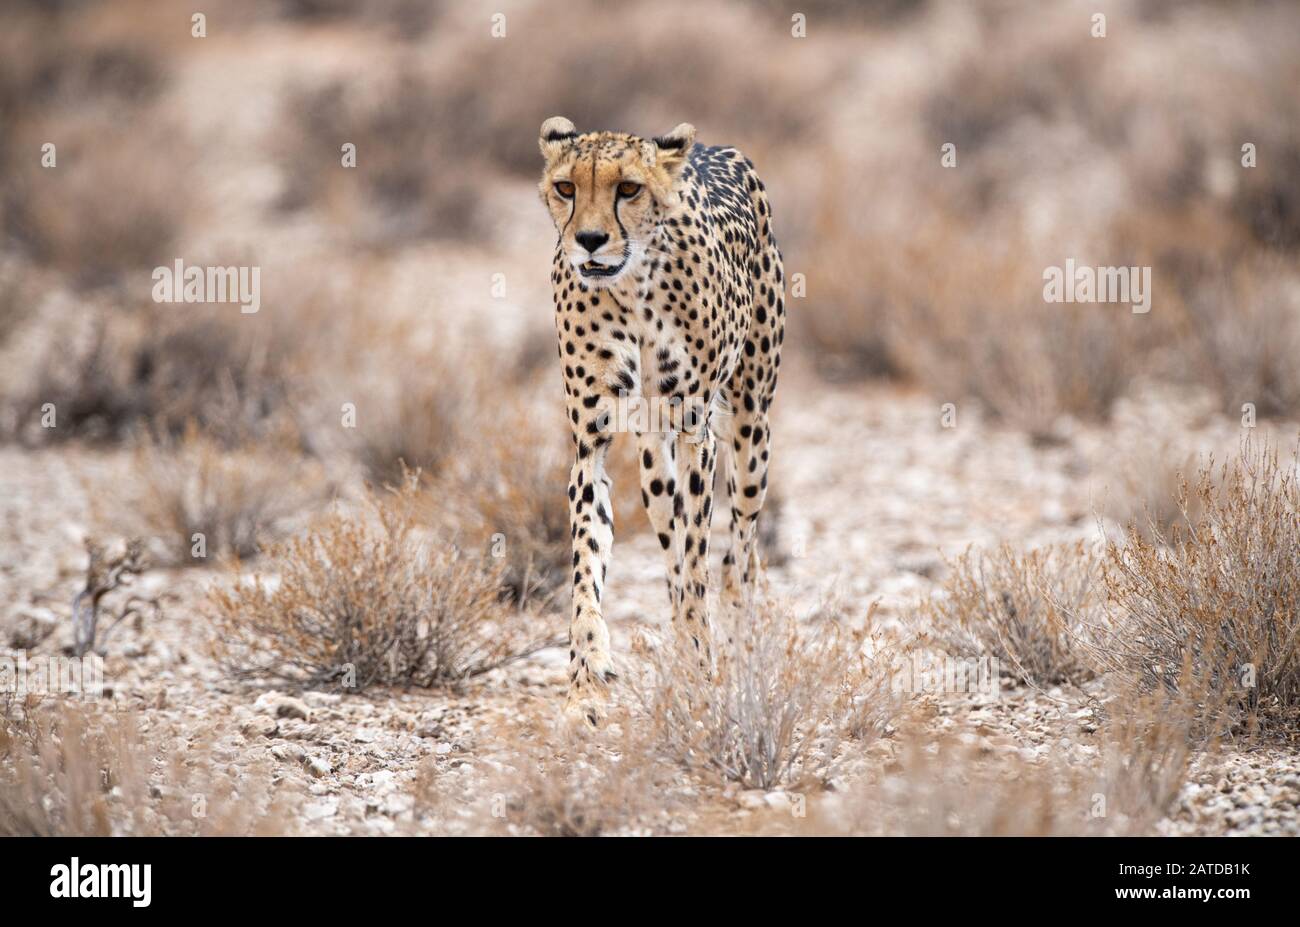 Portrait of a Cheetah standing in the bush, South Africa Stock Photo